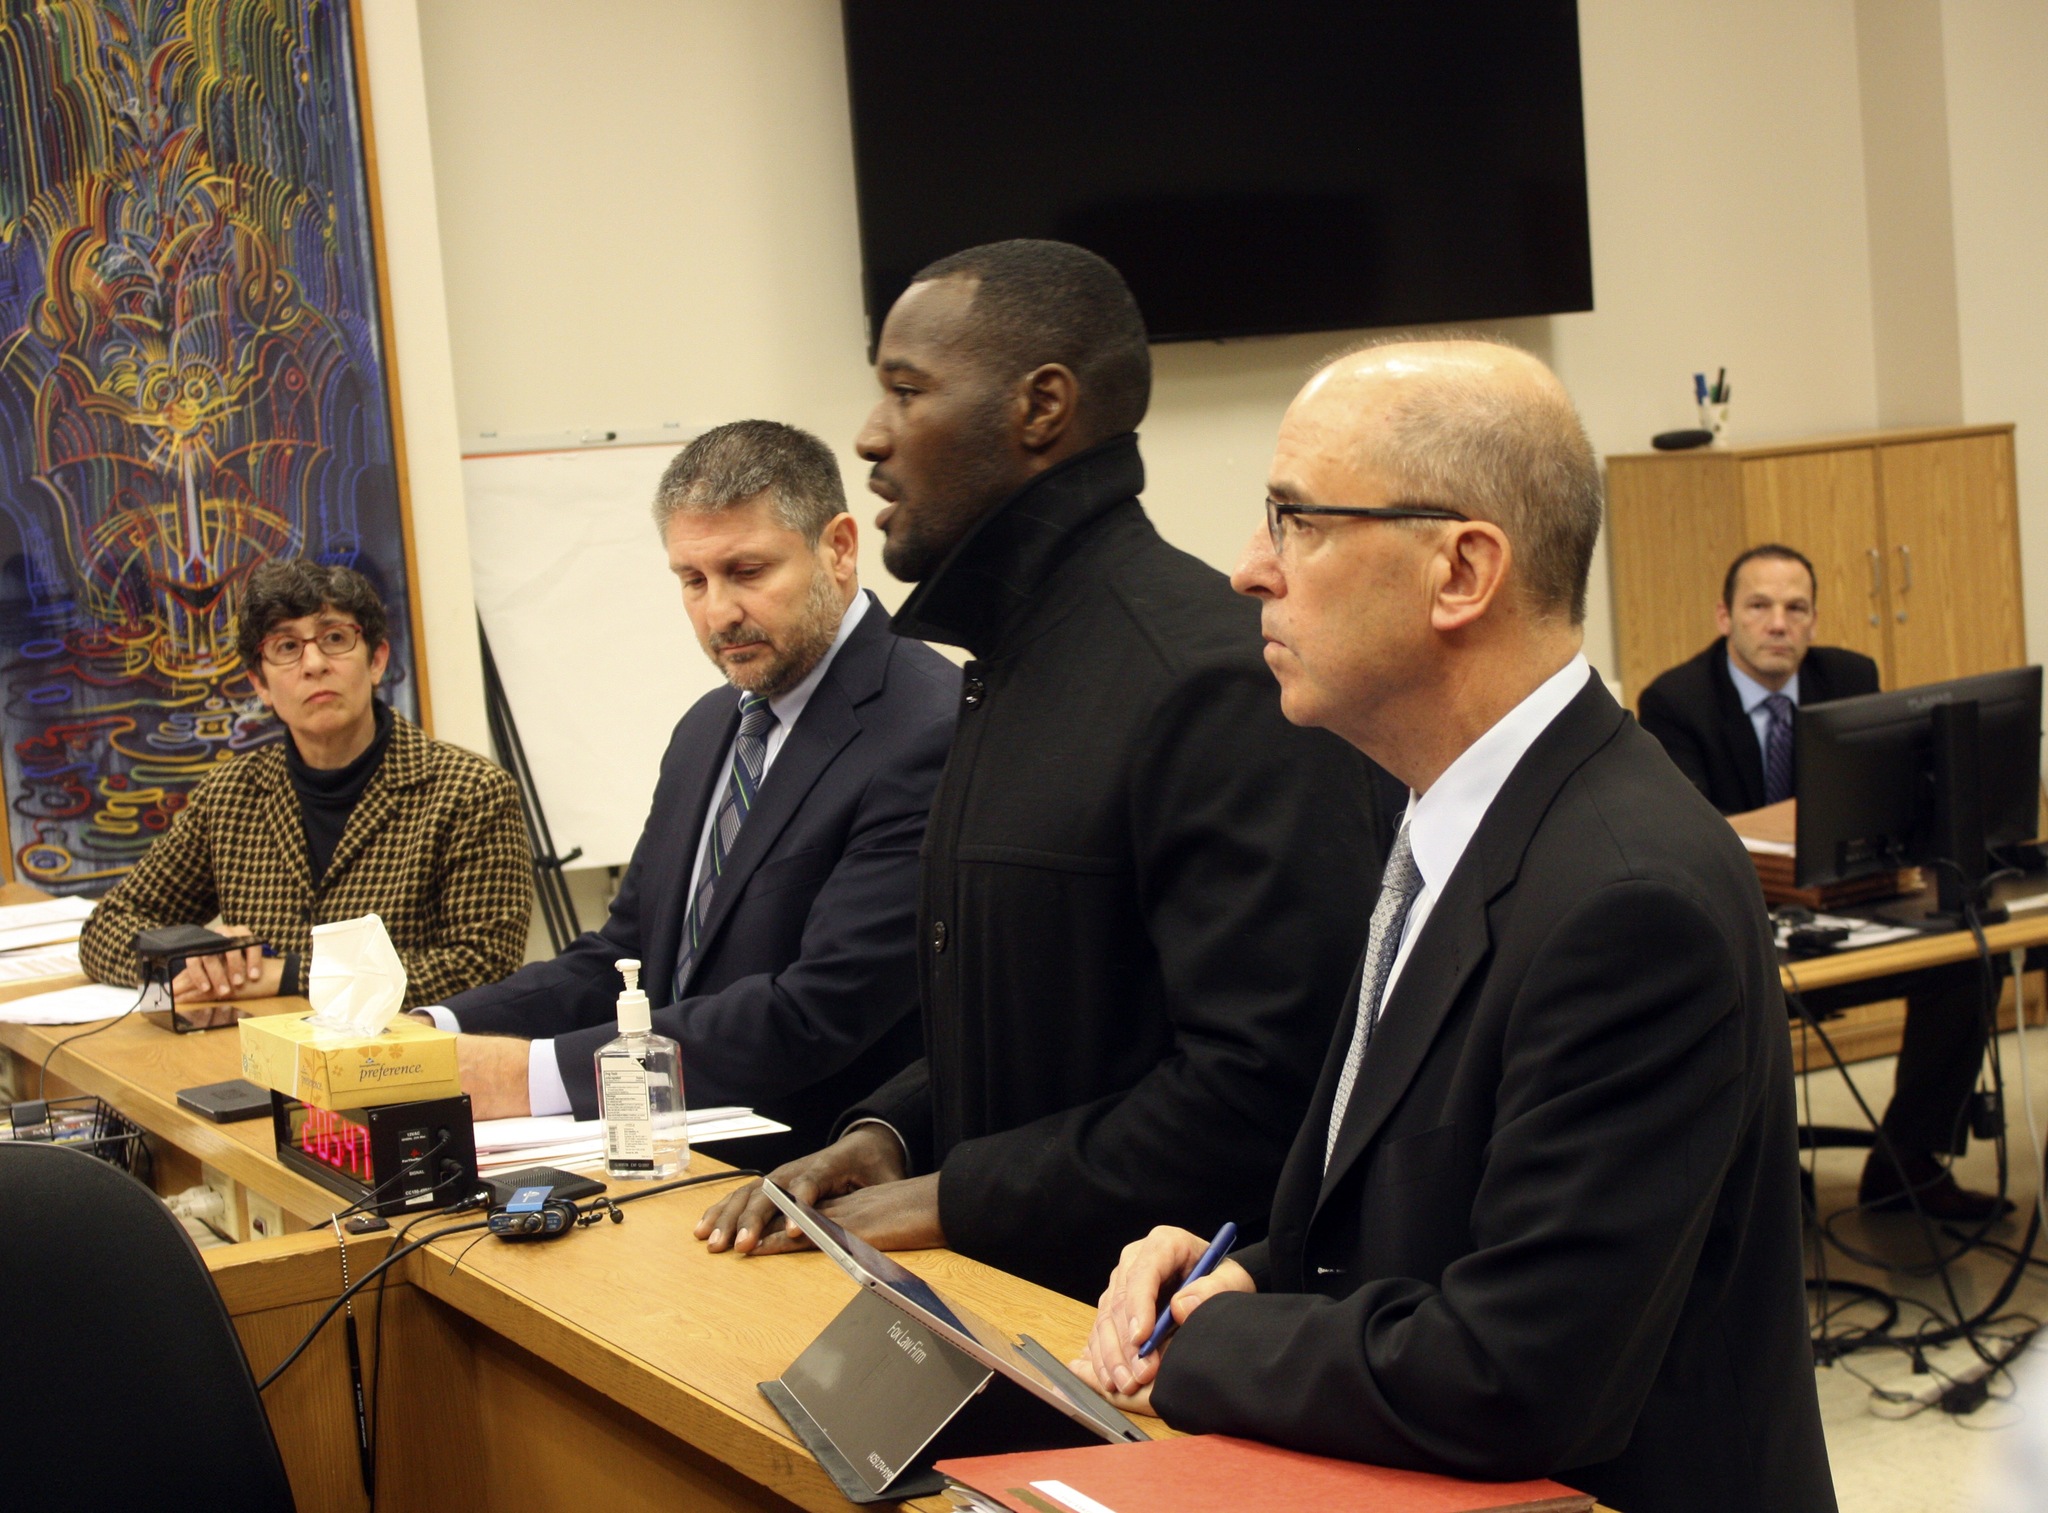 Former Seattle Seahawks player Derrick Coleman (second from the right) speaks to the judge during his sentencing hearing on Friday at the King County Superior Courthouse. Carrie Rodriguez/staff photo